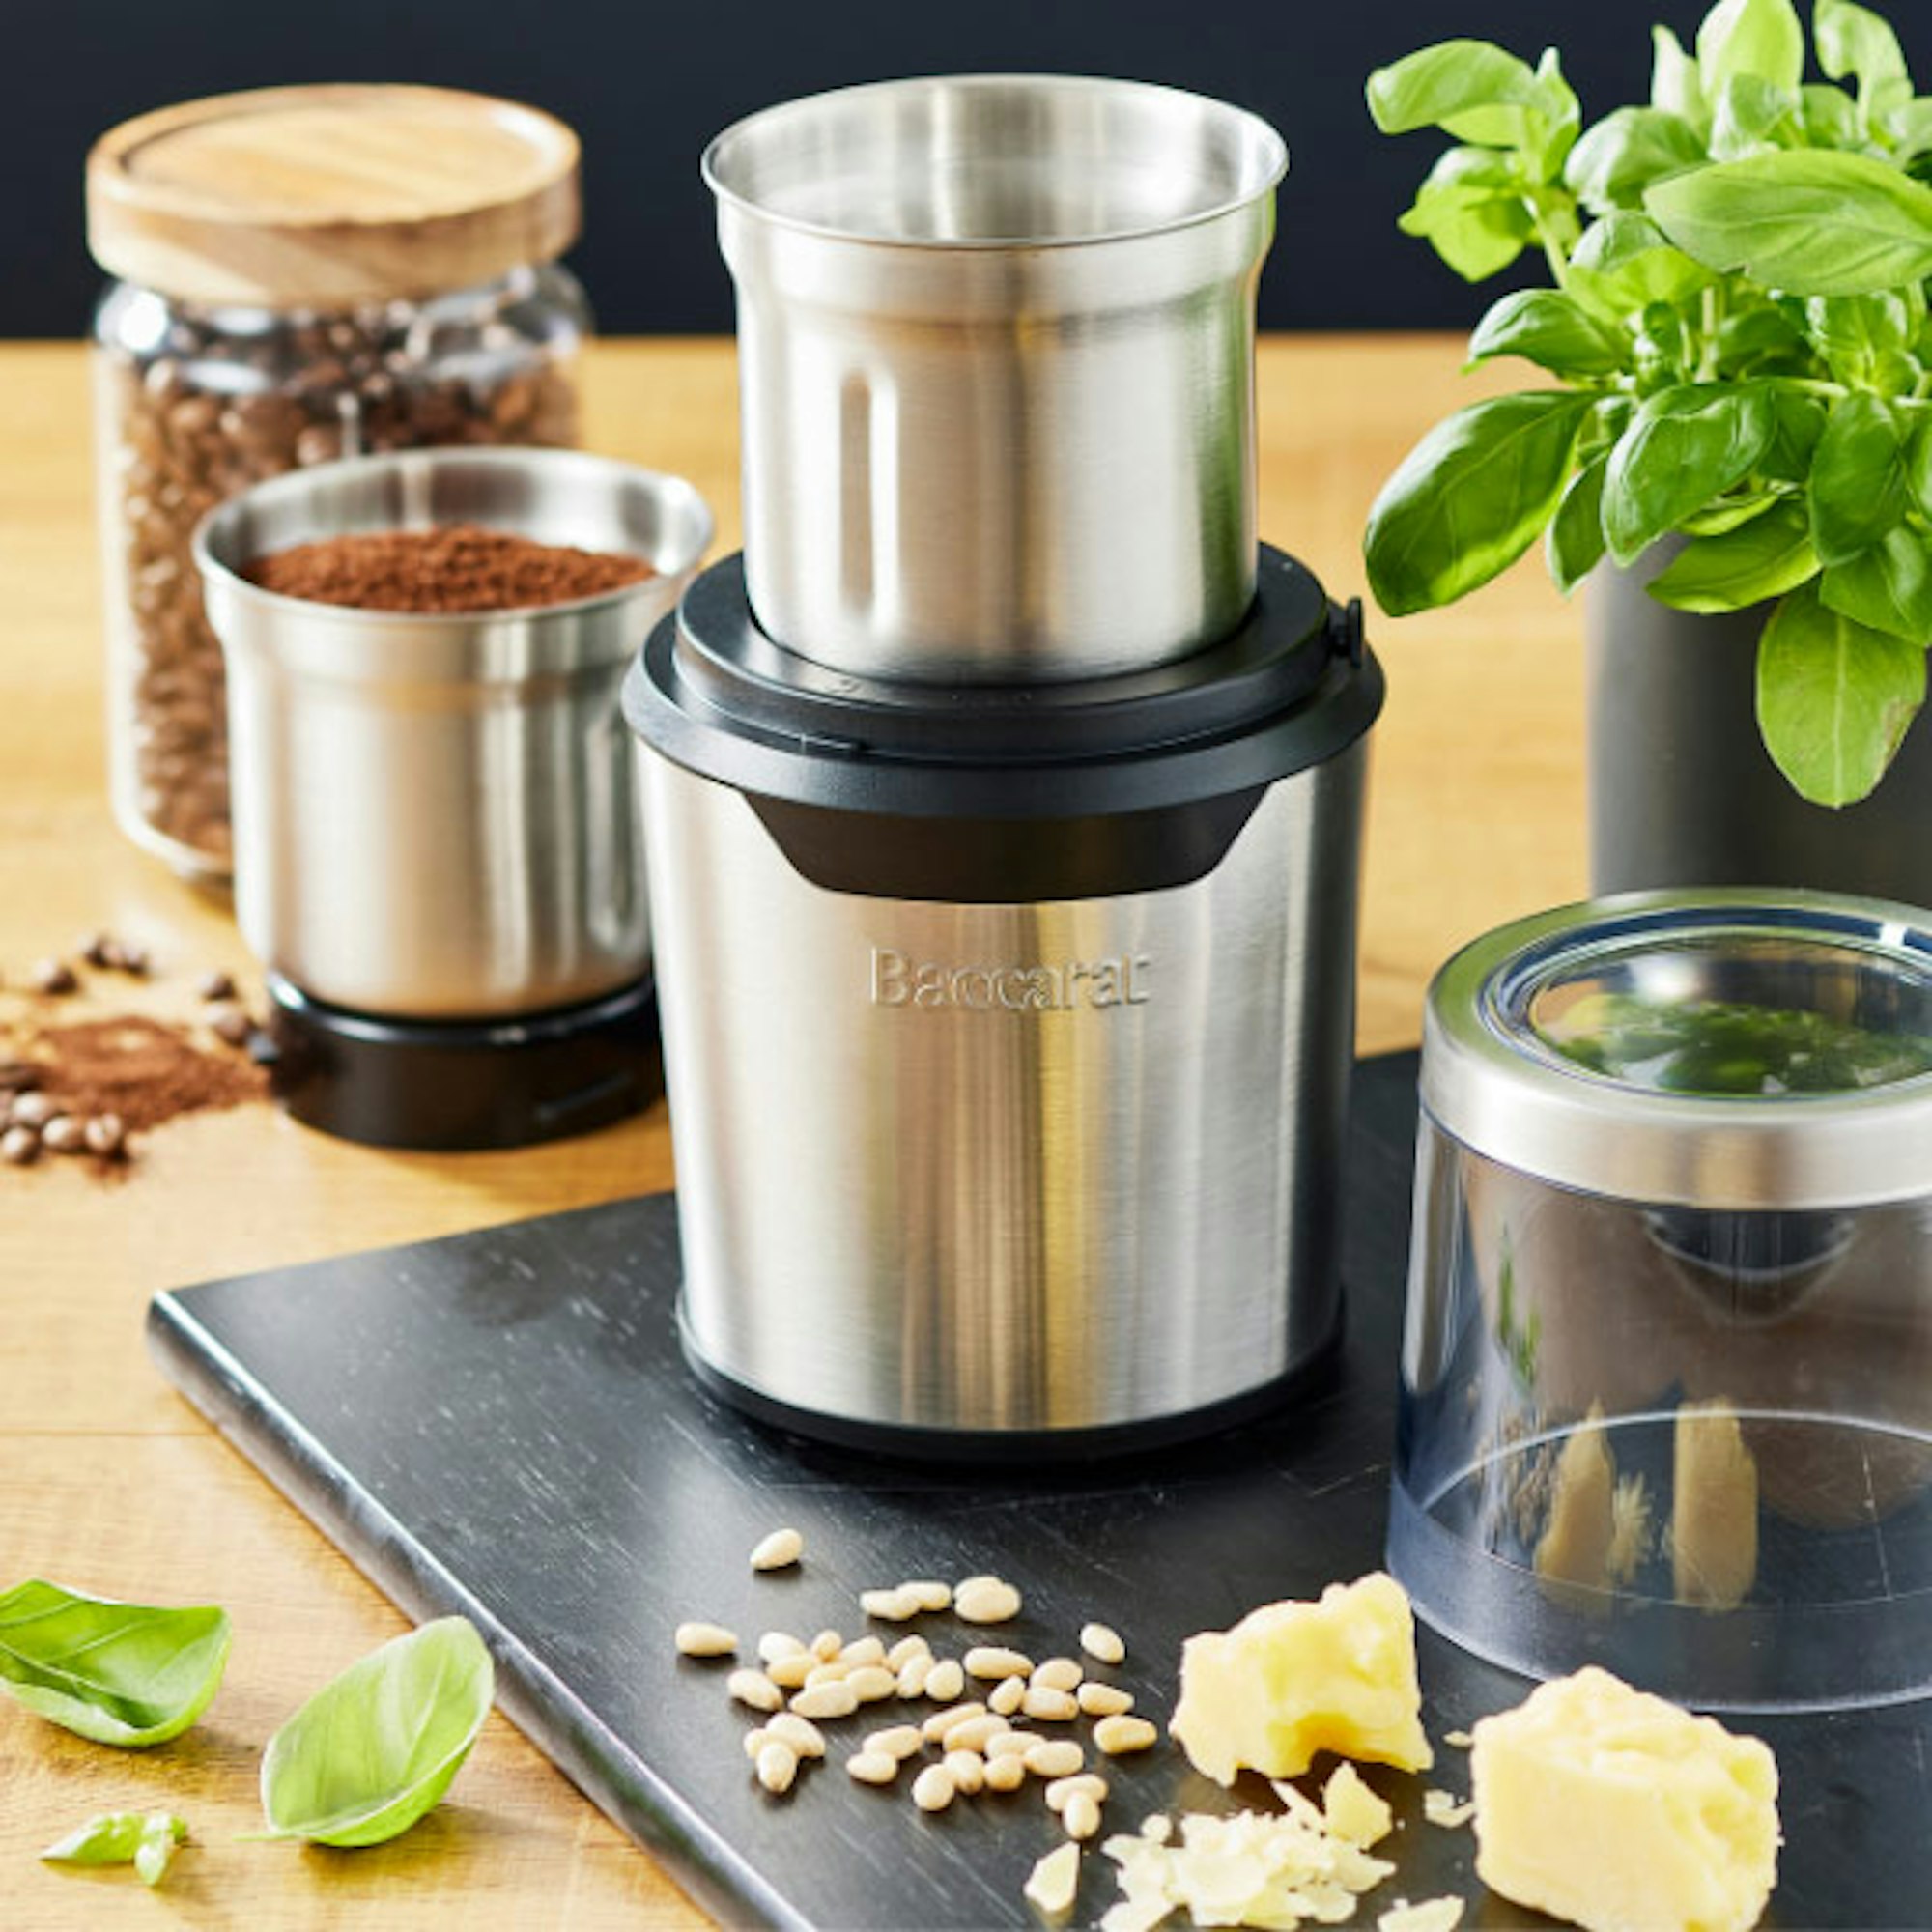 Basil Pesto recipe. Baccarat The Flavour maker Coffee & Spice Grinder.